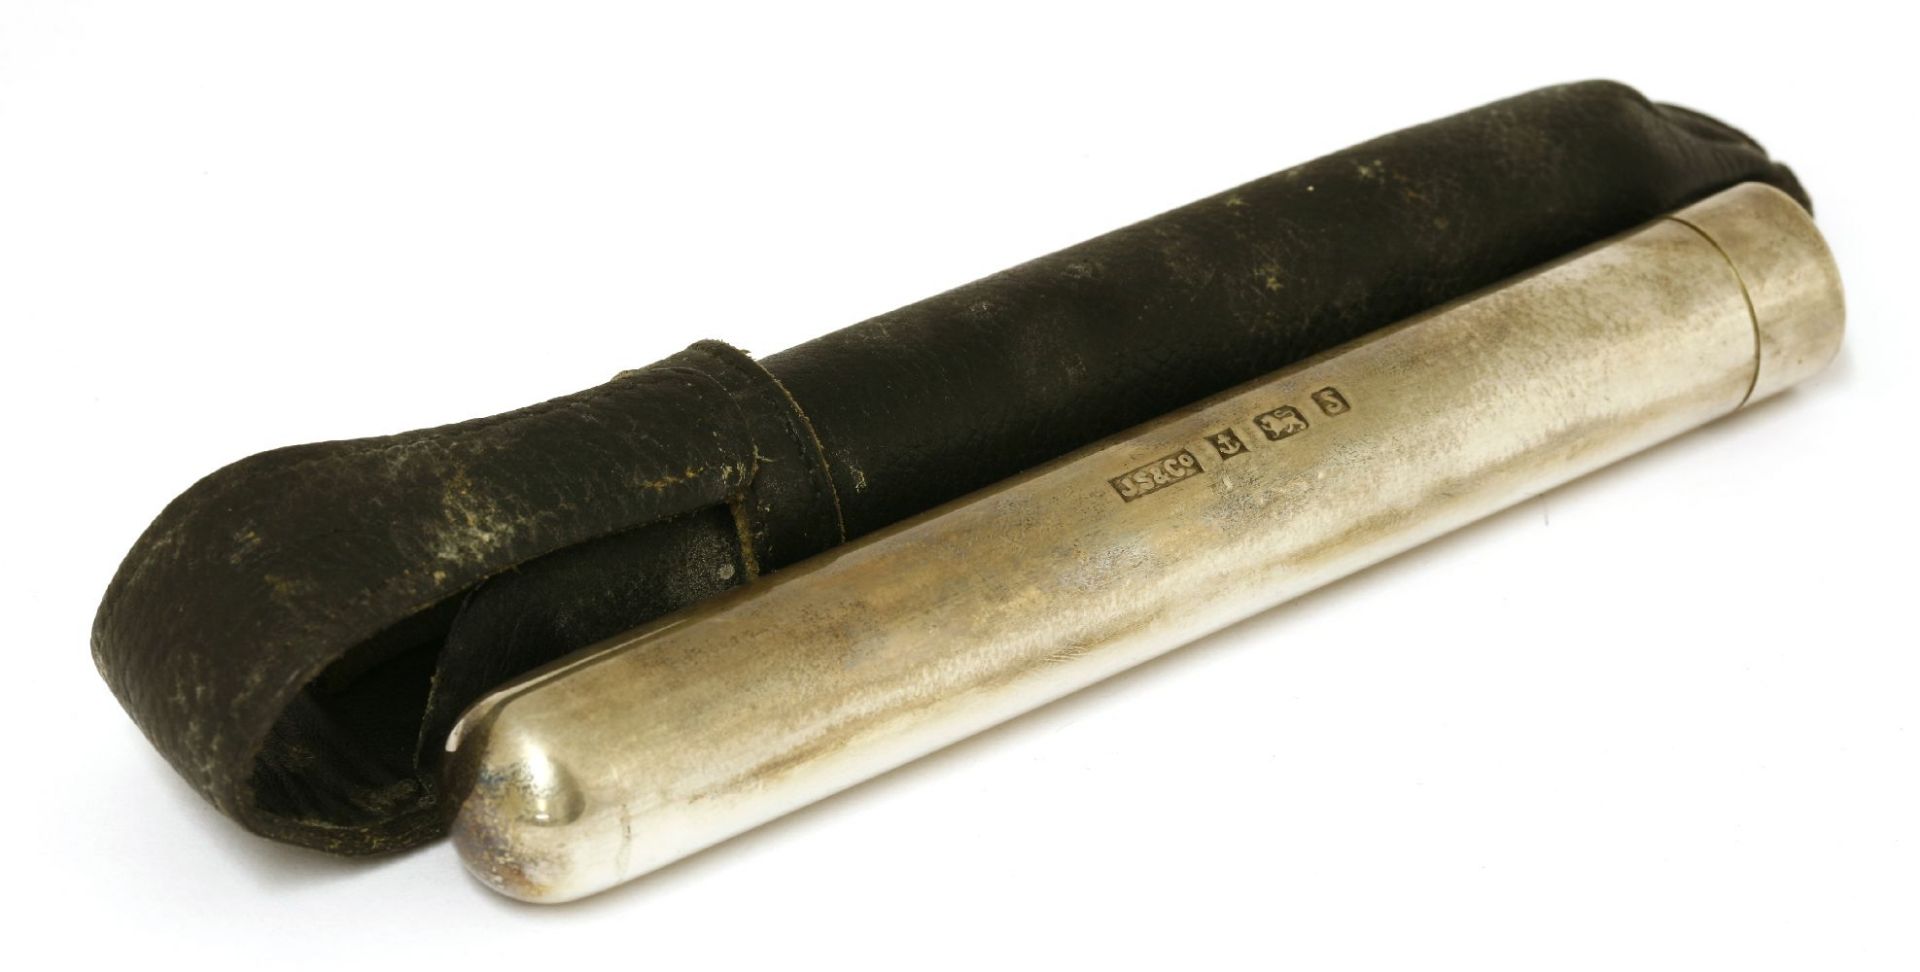 Shooting Interest: a modern silver cigar holder,16.5cm, in a leather carrying case,17cm long anda